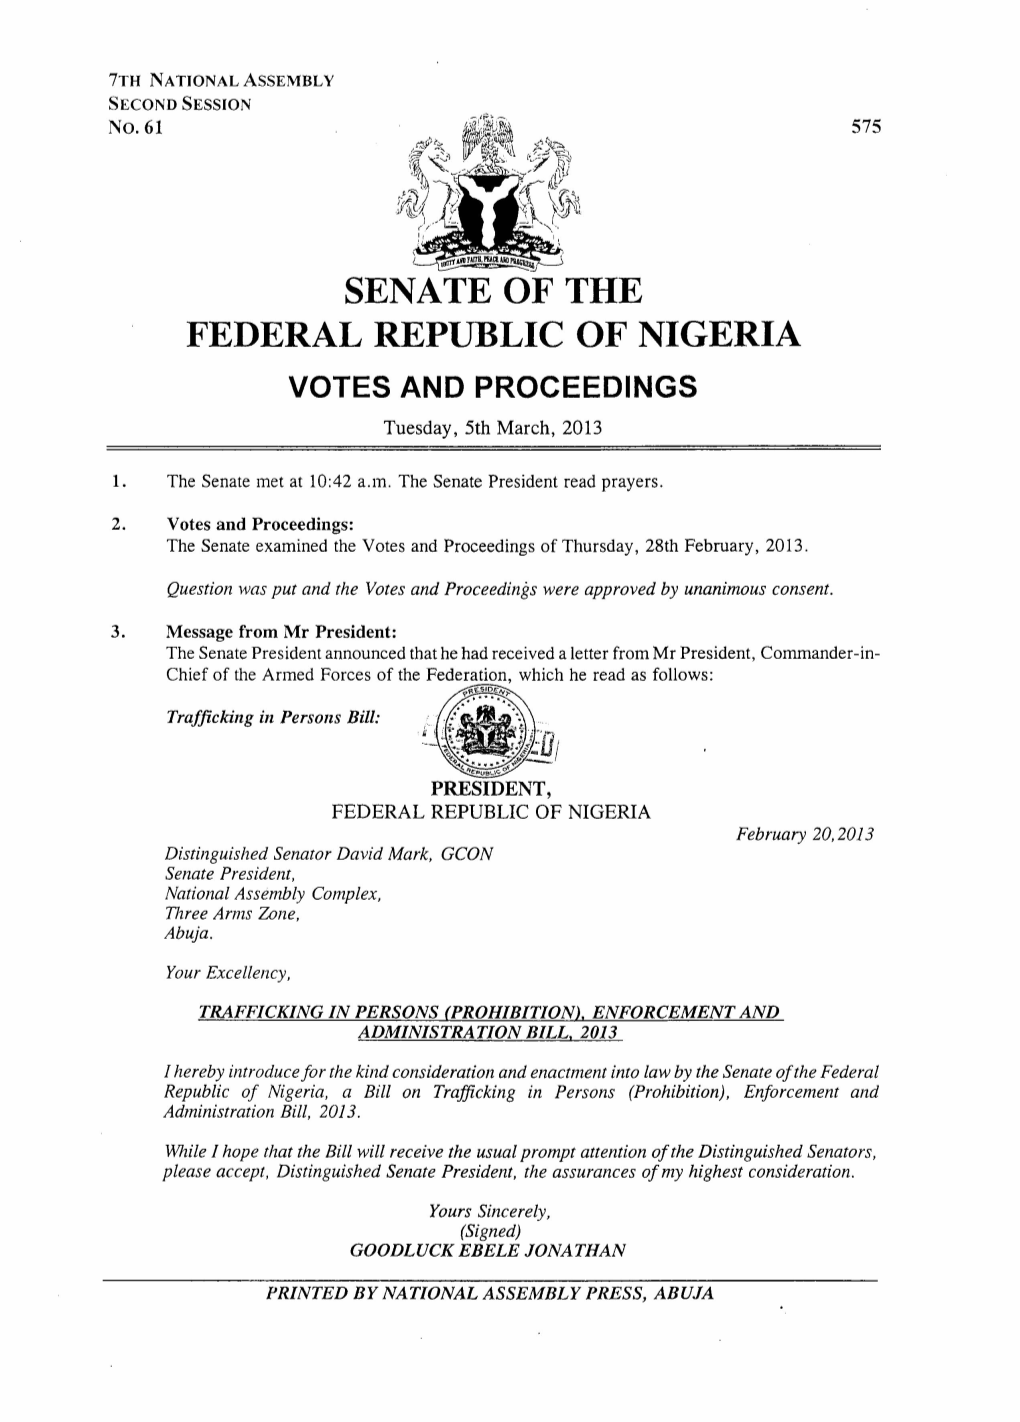 SENATE of the FEDERAL REPUBLIC of NIGERIA VOTES and PROCEEDINGS Tuesday, 5Th March, 2013